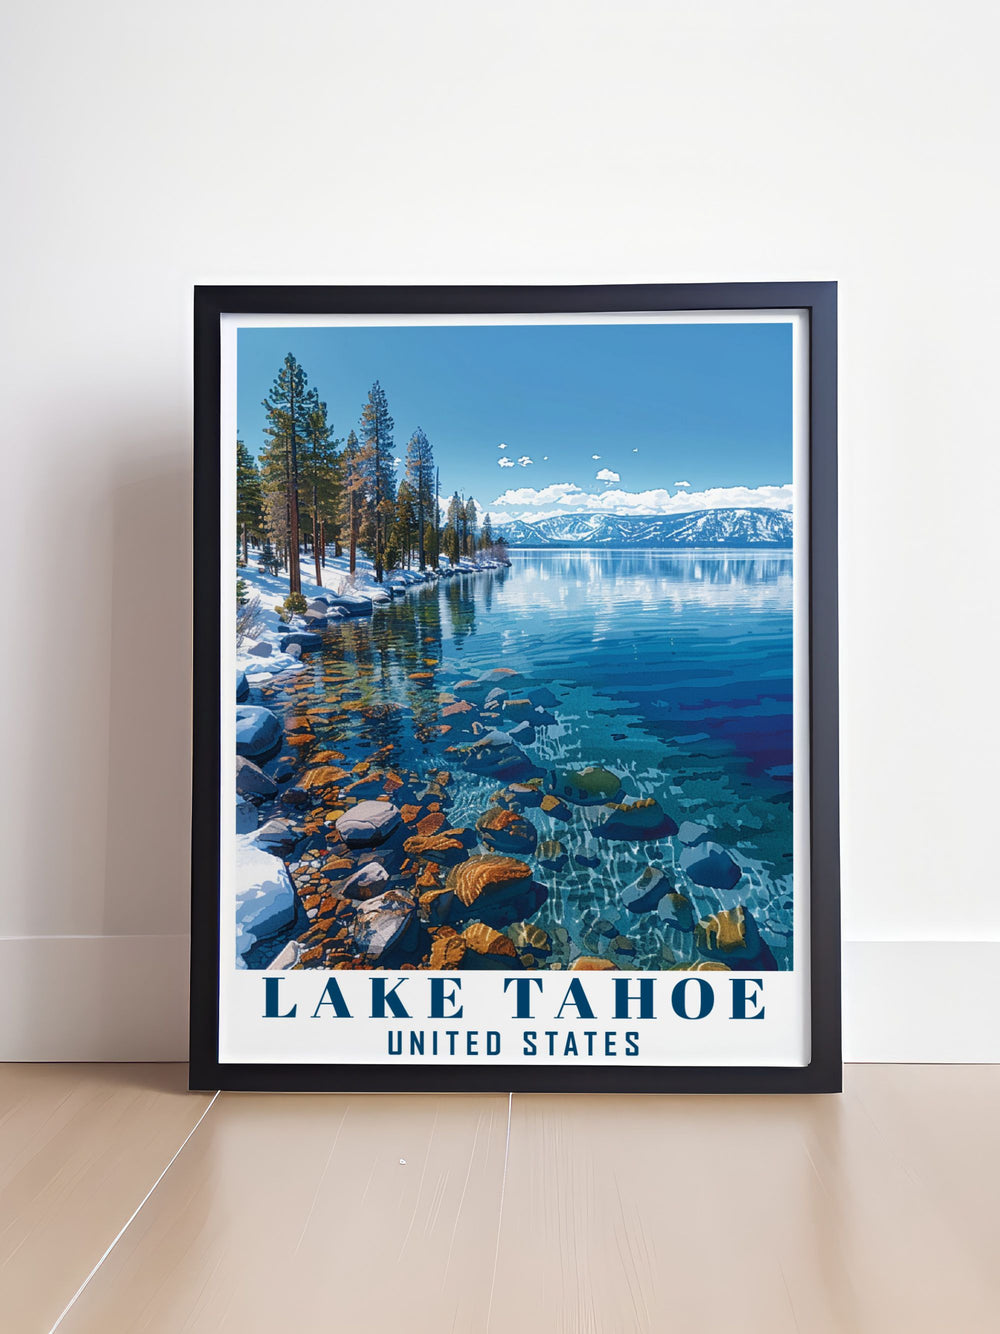 Enhance your living room with a Lake Tahoe Art Print showcasing the serene and picturesque scenery of this beautiful destination